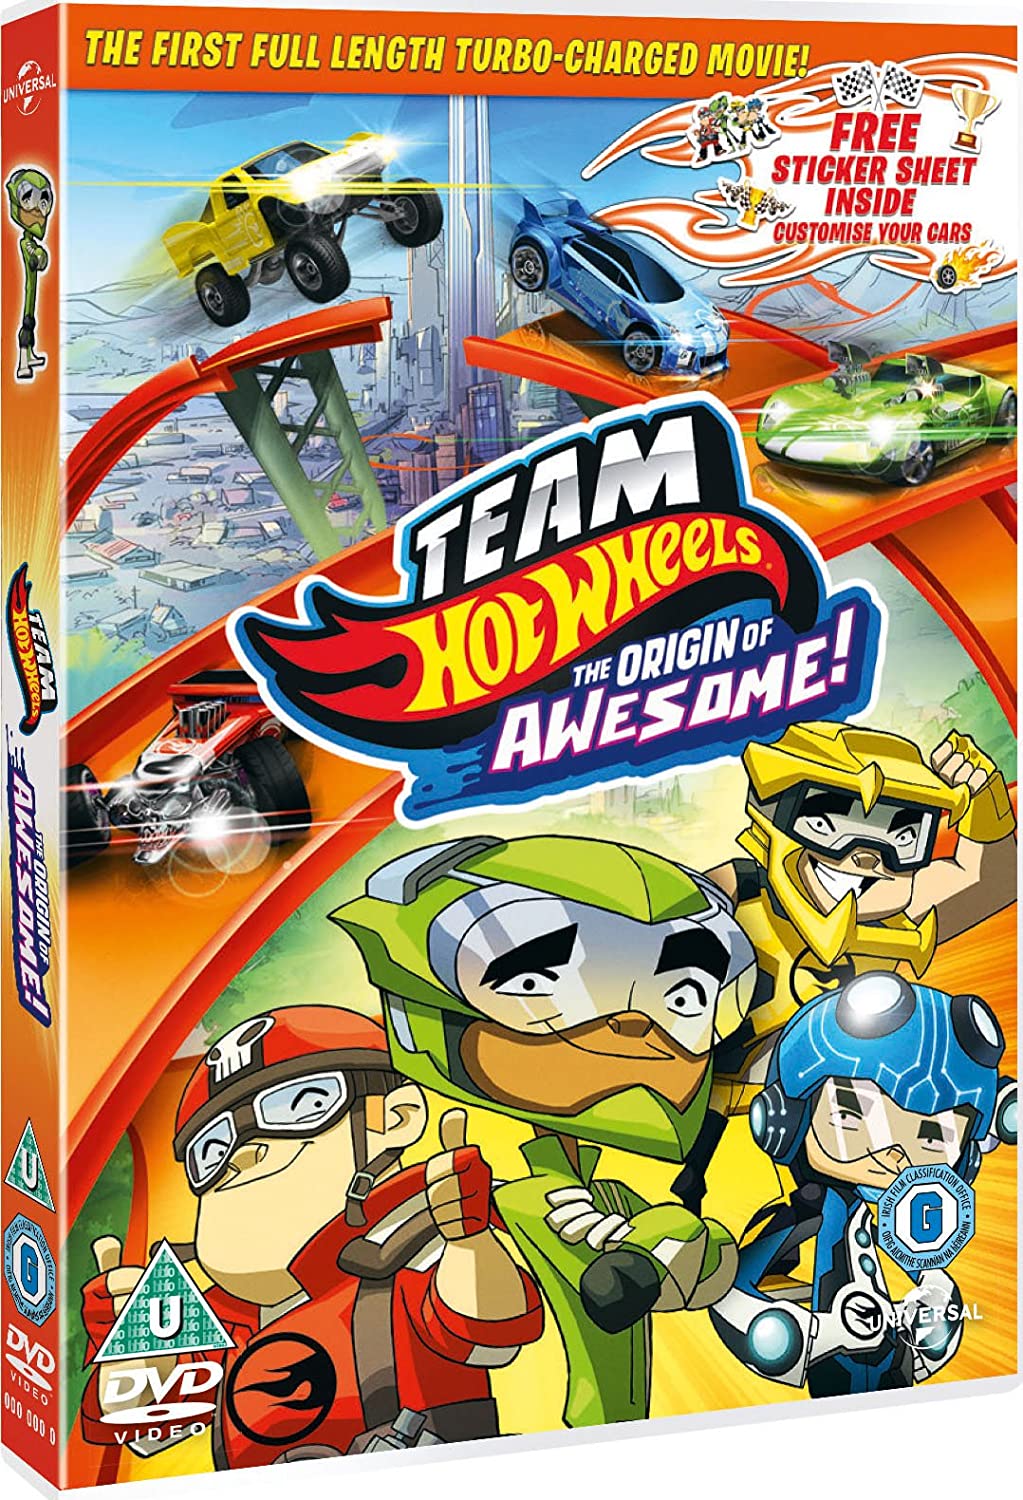 Team Hot Wheels: The Origin of Awesome (Includes Sticker Sheet) [DVD] [2013]